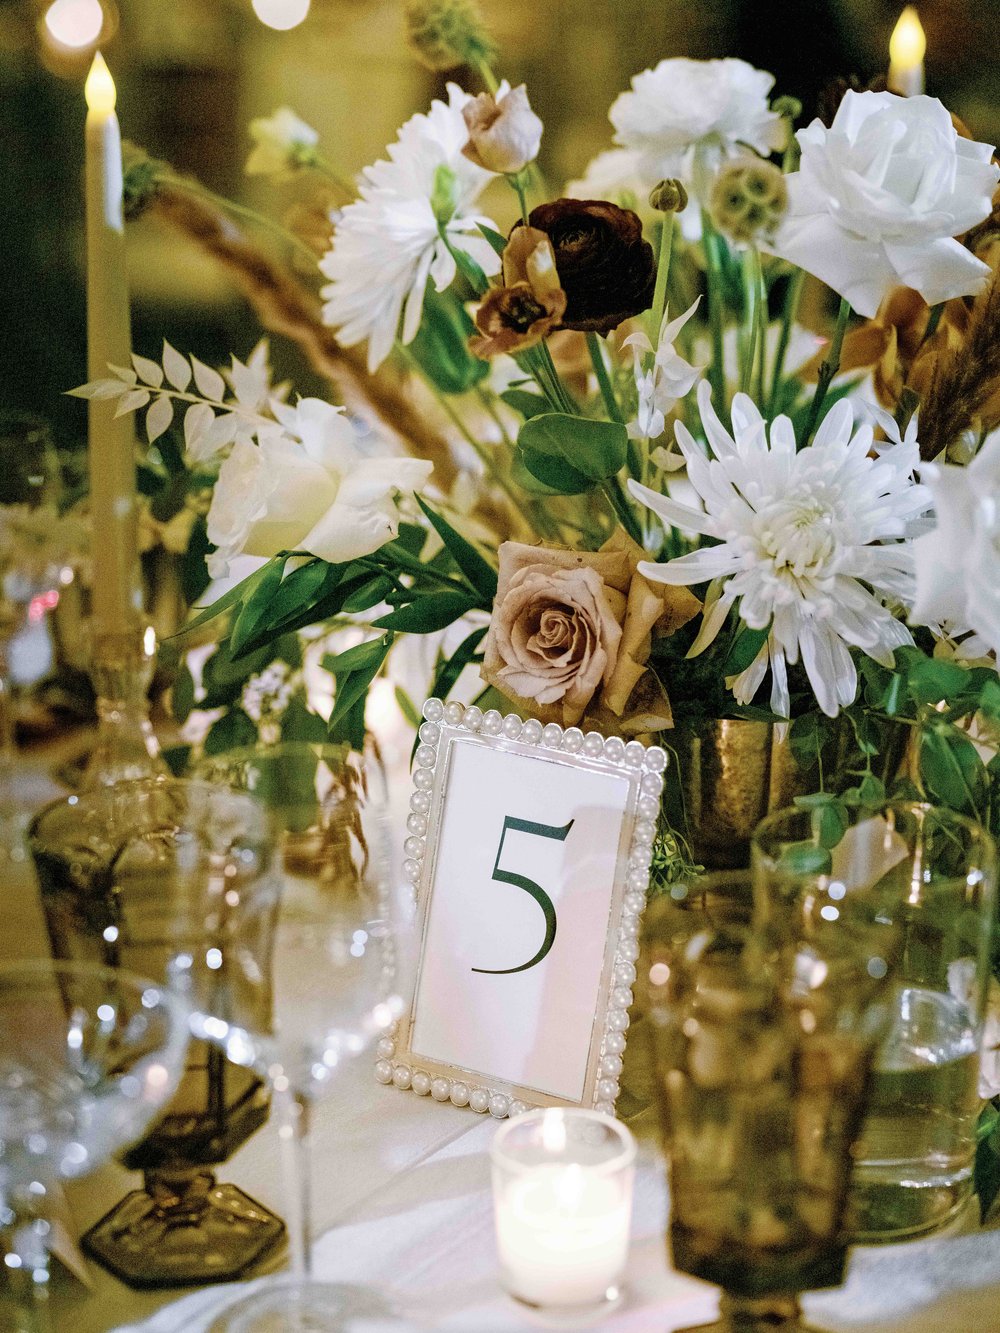 Floral Centerpiece with Table Number